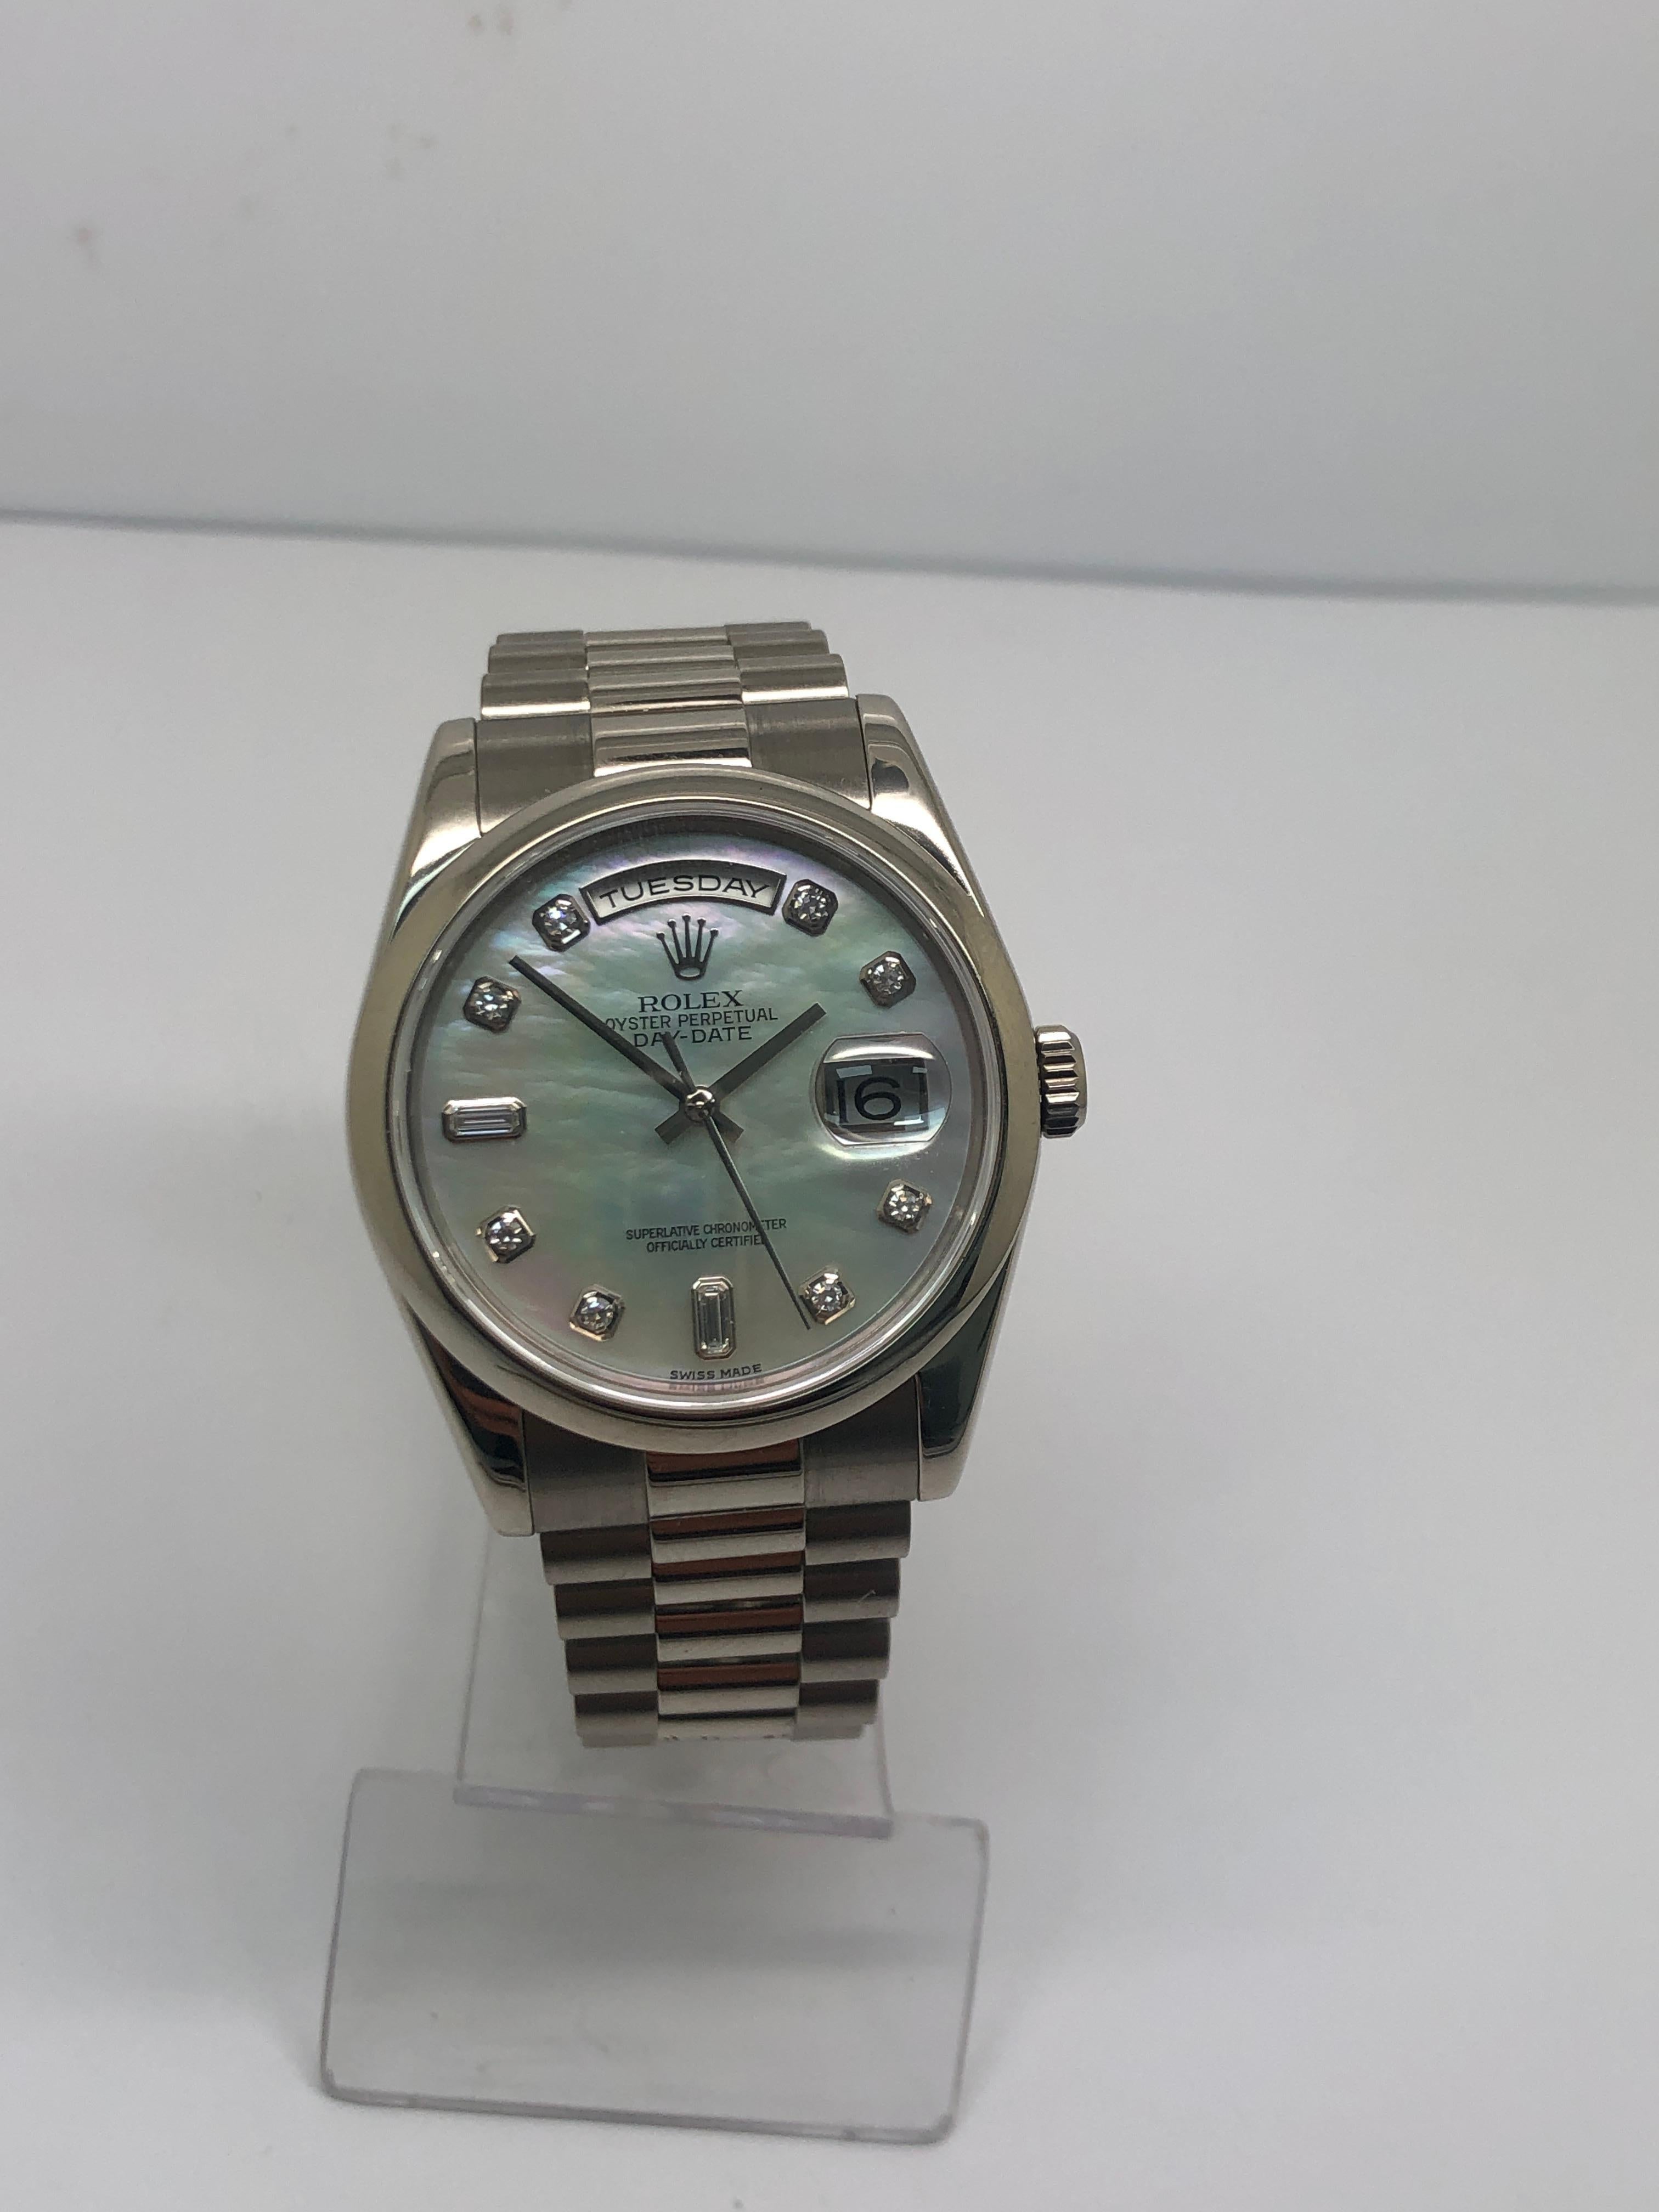 Rolex Day Date 36mm Mother Of Pearl Diamond Dial Watch

all original Rolex parts

comes with original paperwork 